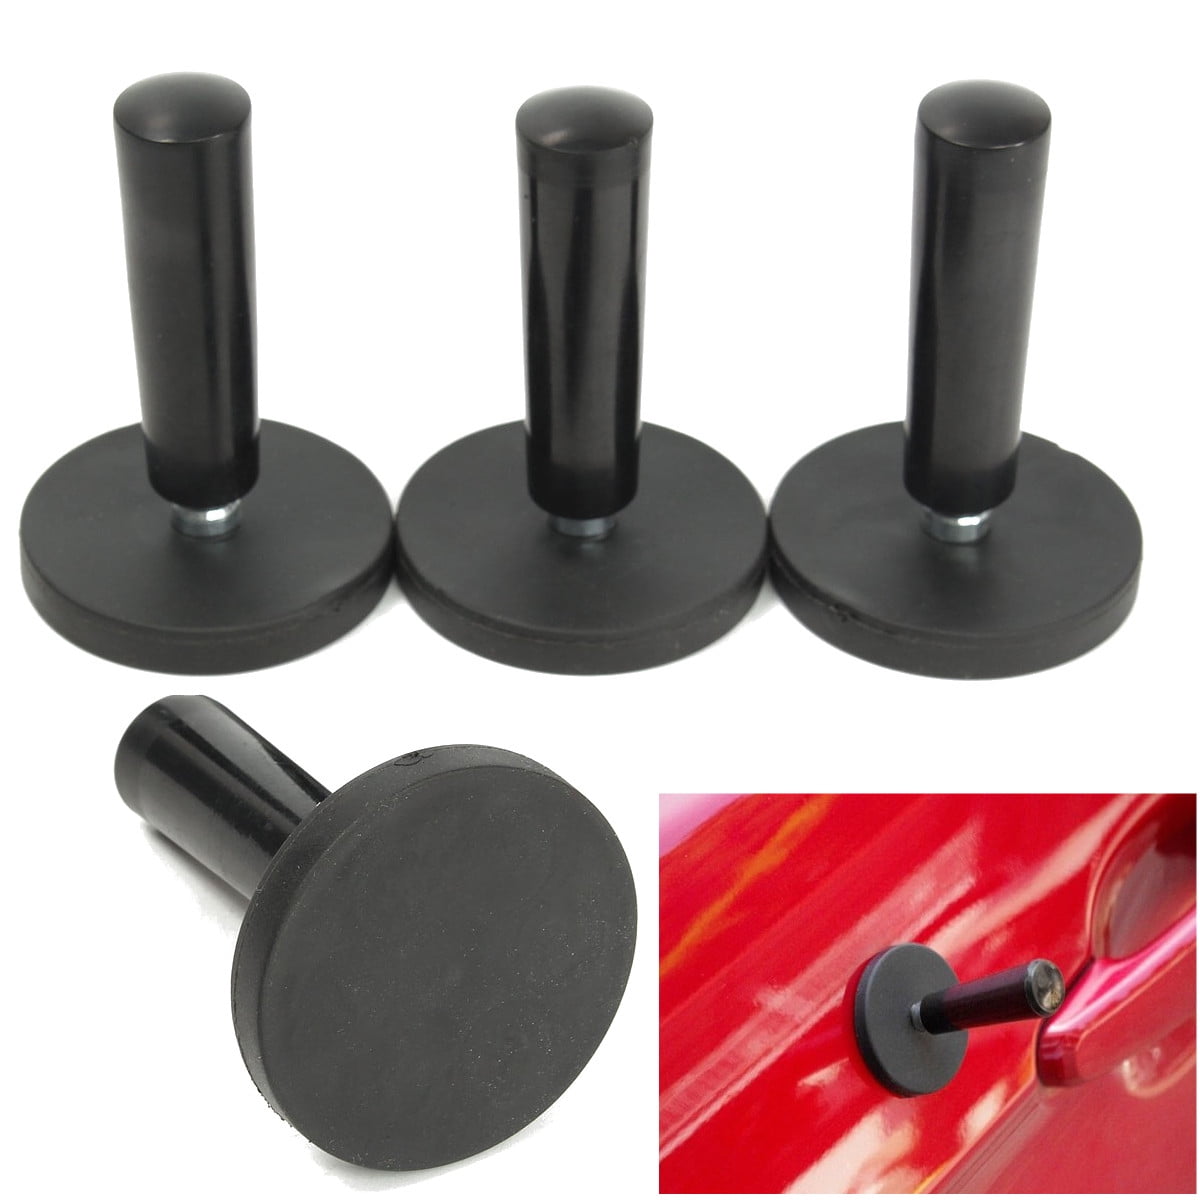 Magnets and Silicone Patch for Non-metal Areas Vinyl Wrap Film Position Helper